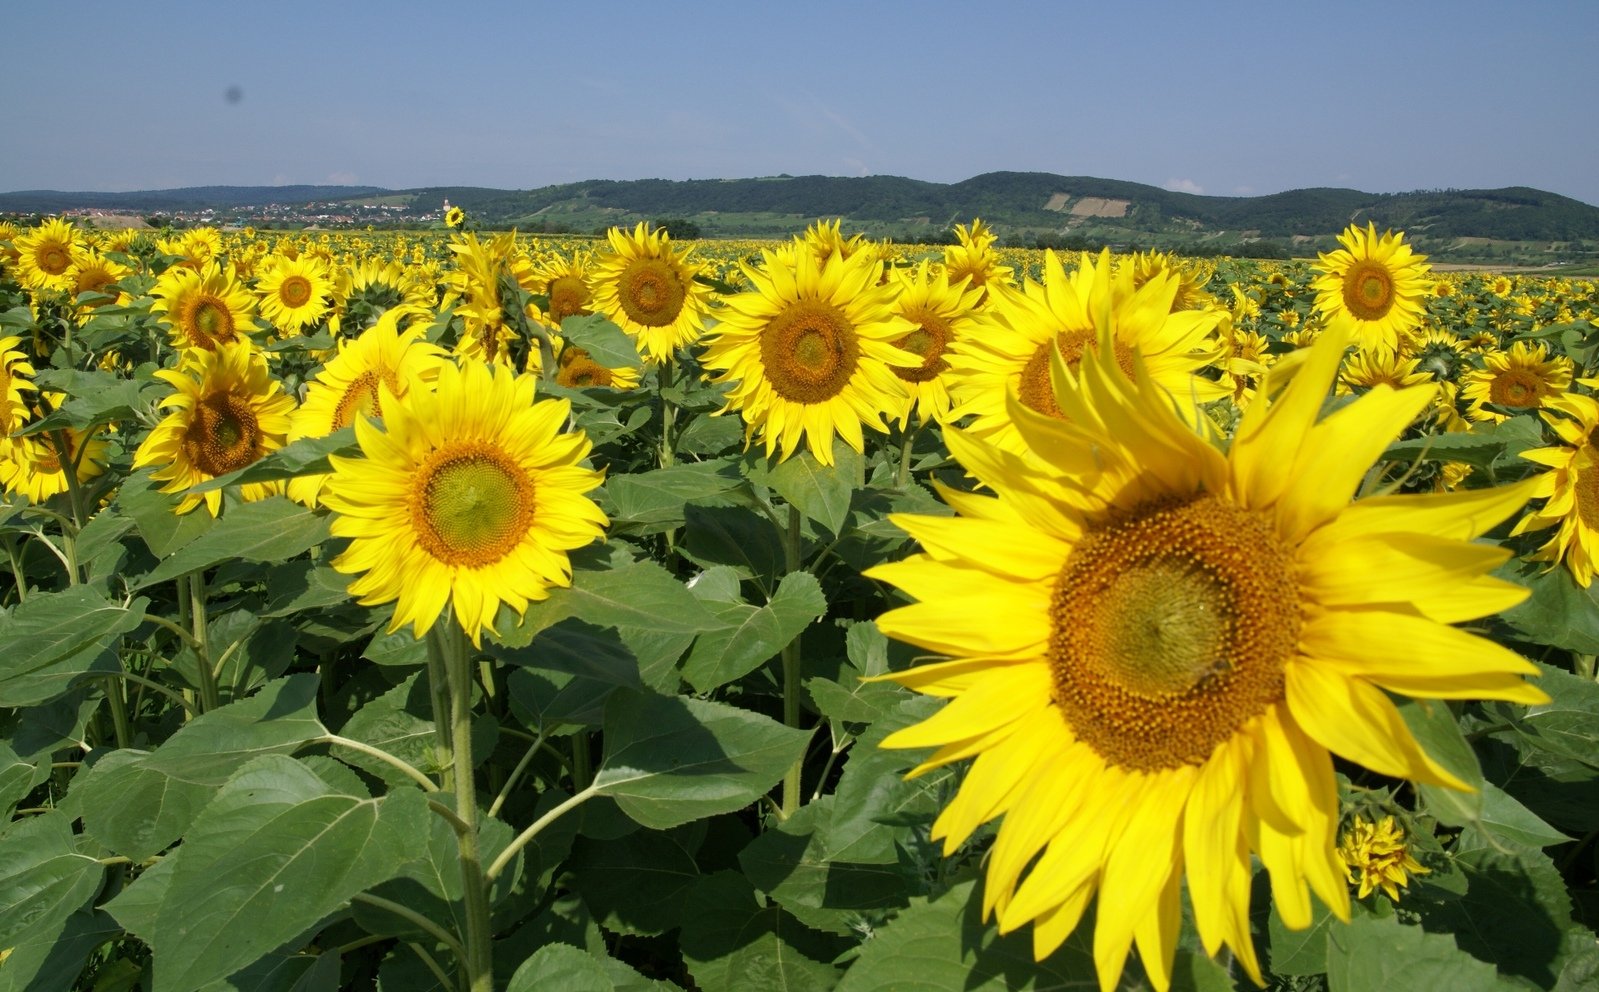 large, sunflowers with a blue sky in the background